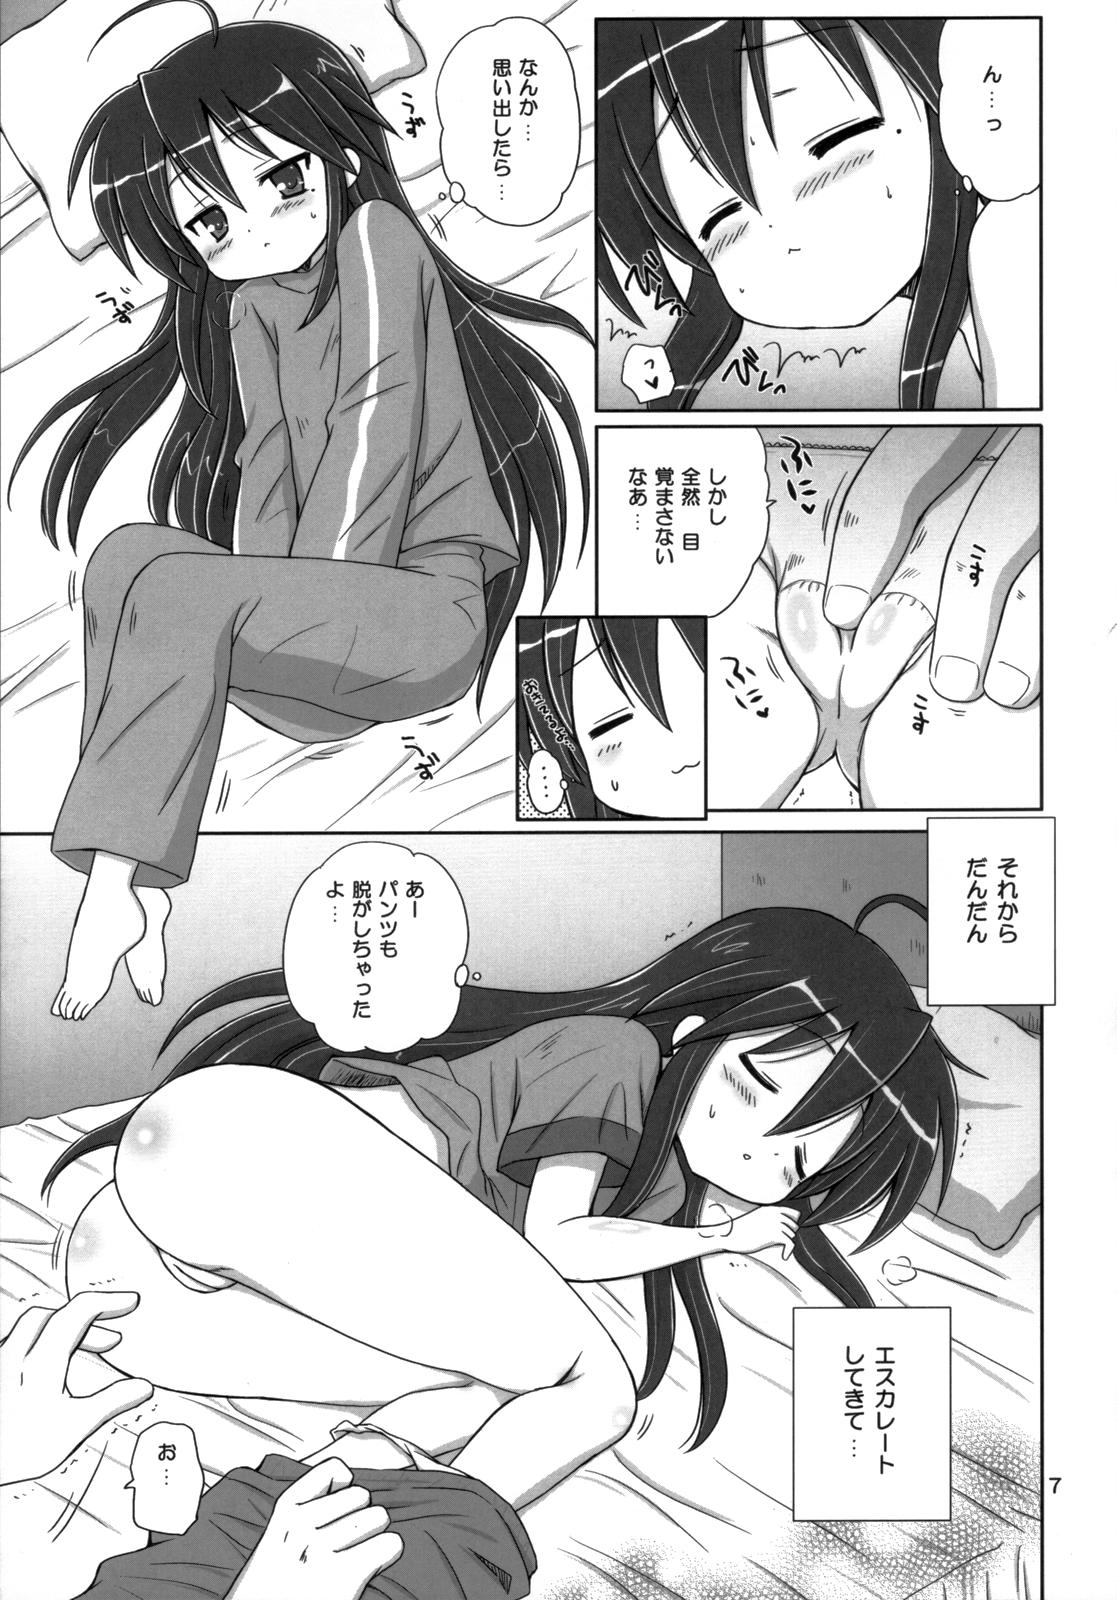 Handjobs Konata Flavor - Lucky star Pussy To Mouth - Page 6